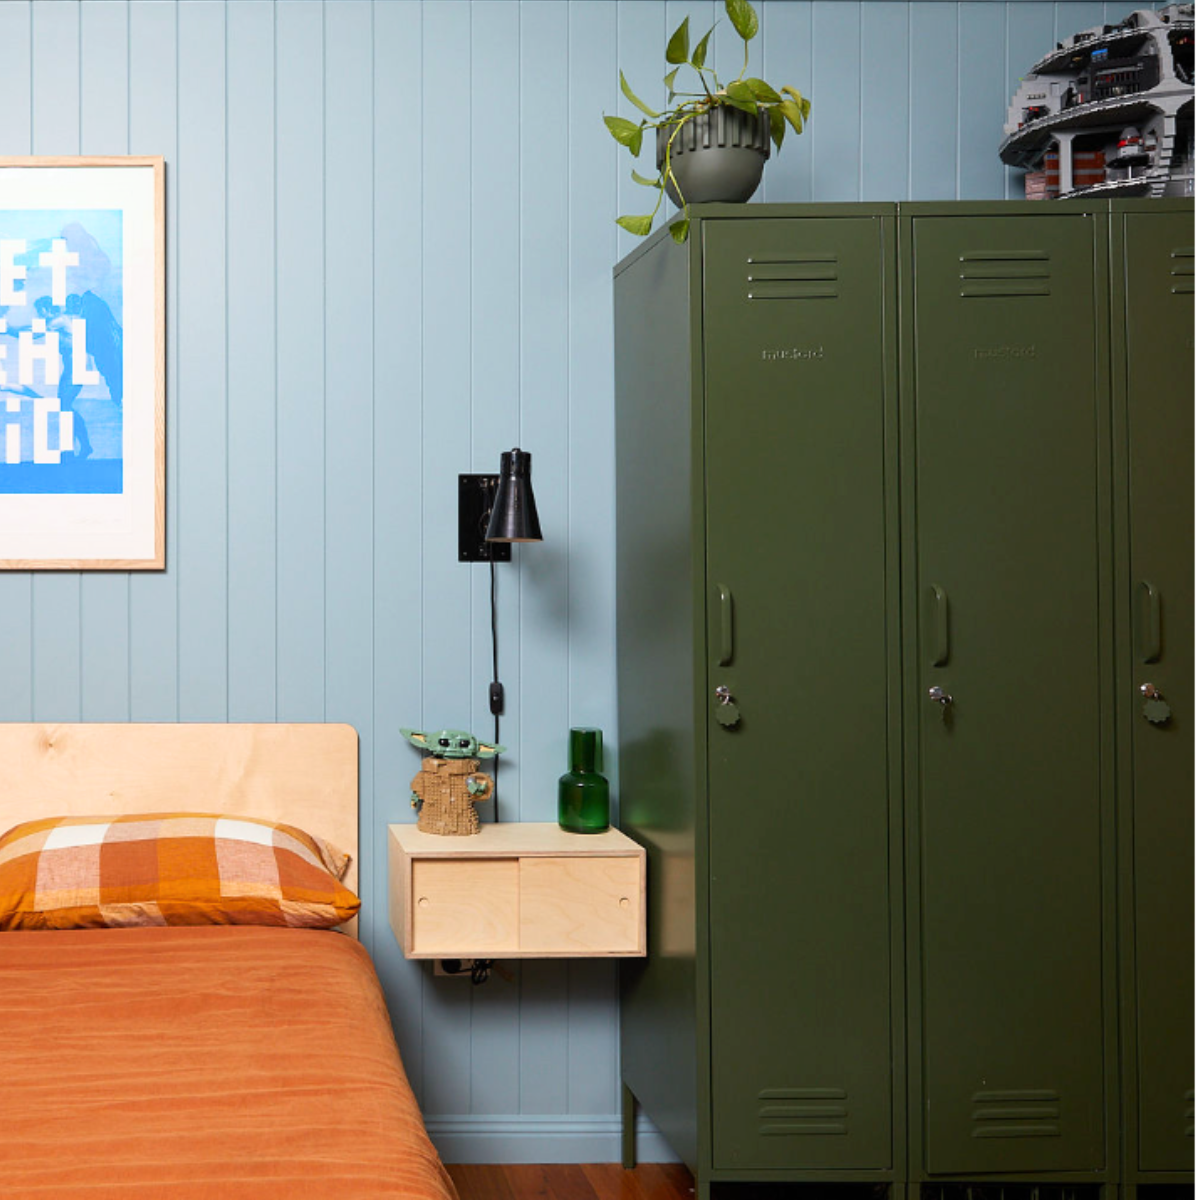 Three Mustard Made Skinny lockers stand side by side. They are all the colour, Olive. They are in front of a light blue-panelled wall. There is a single bed to the left of the lockers, with orange bed linen. A plywood floating bedside table sits beside the bed. There is a light fixture and Baby Yoda Lego figurine on top. 